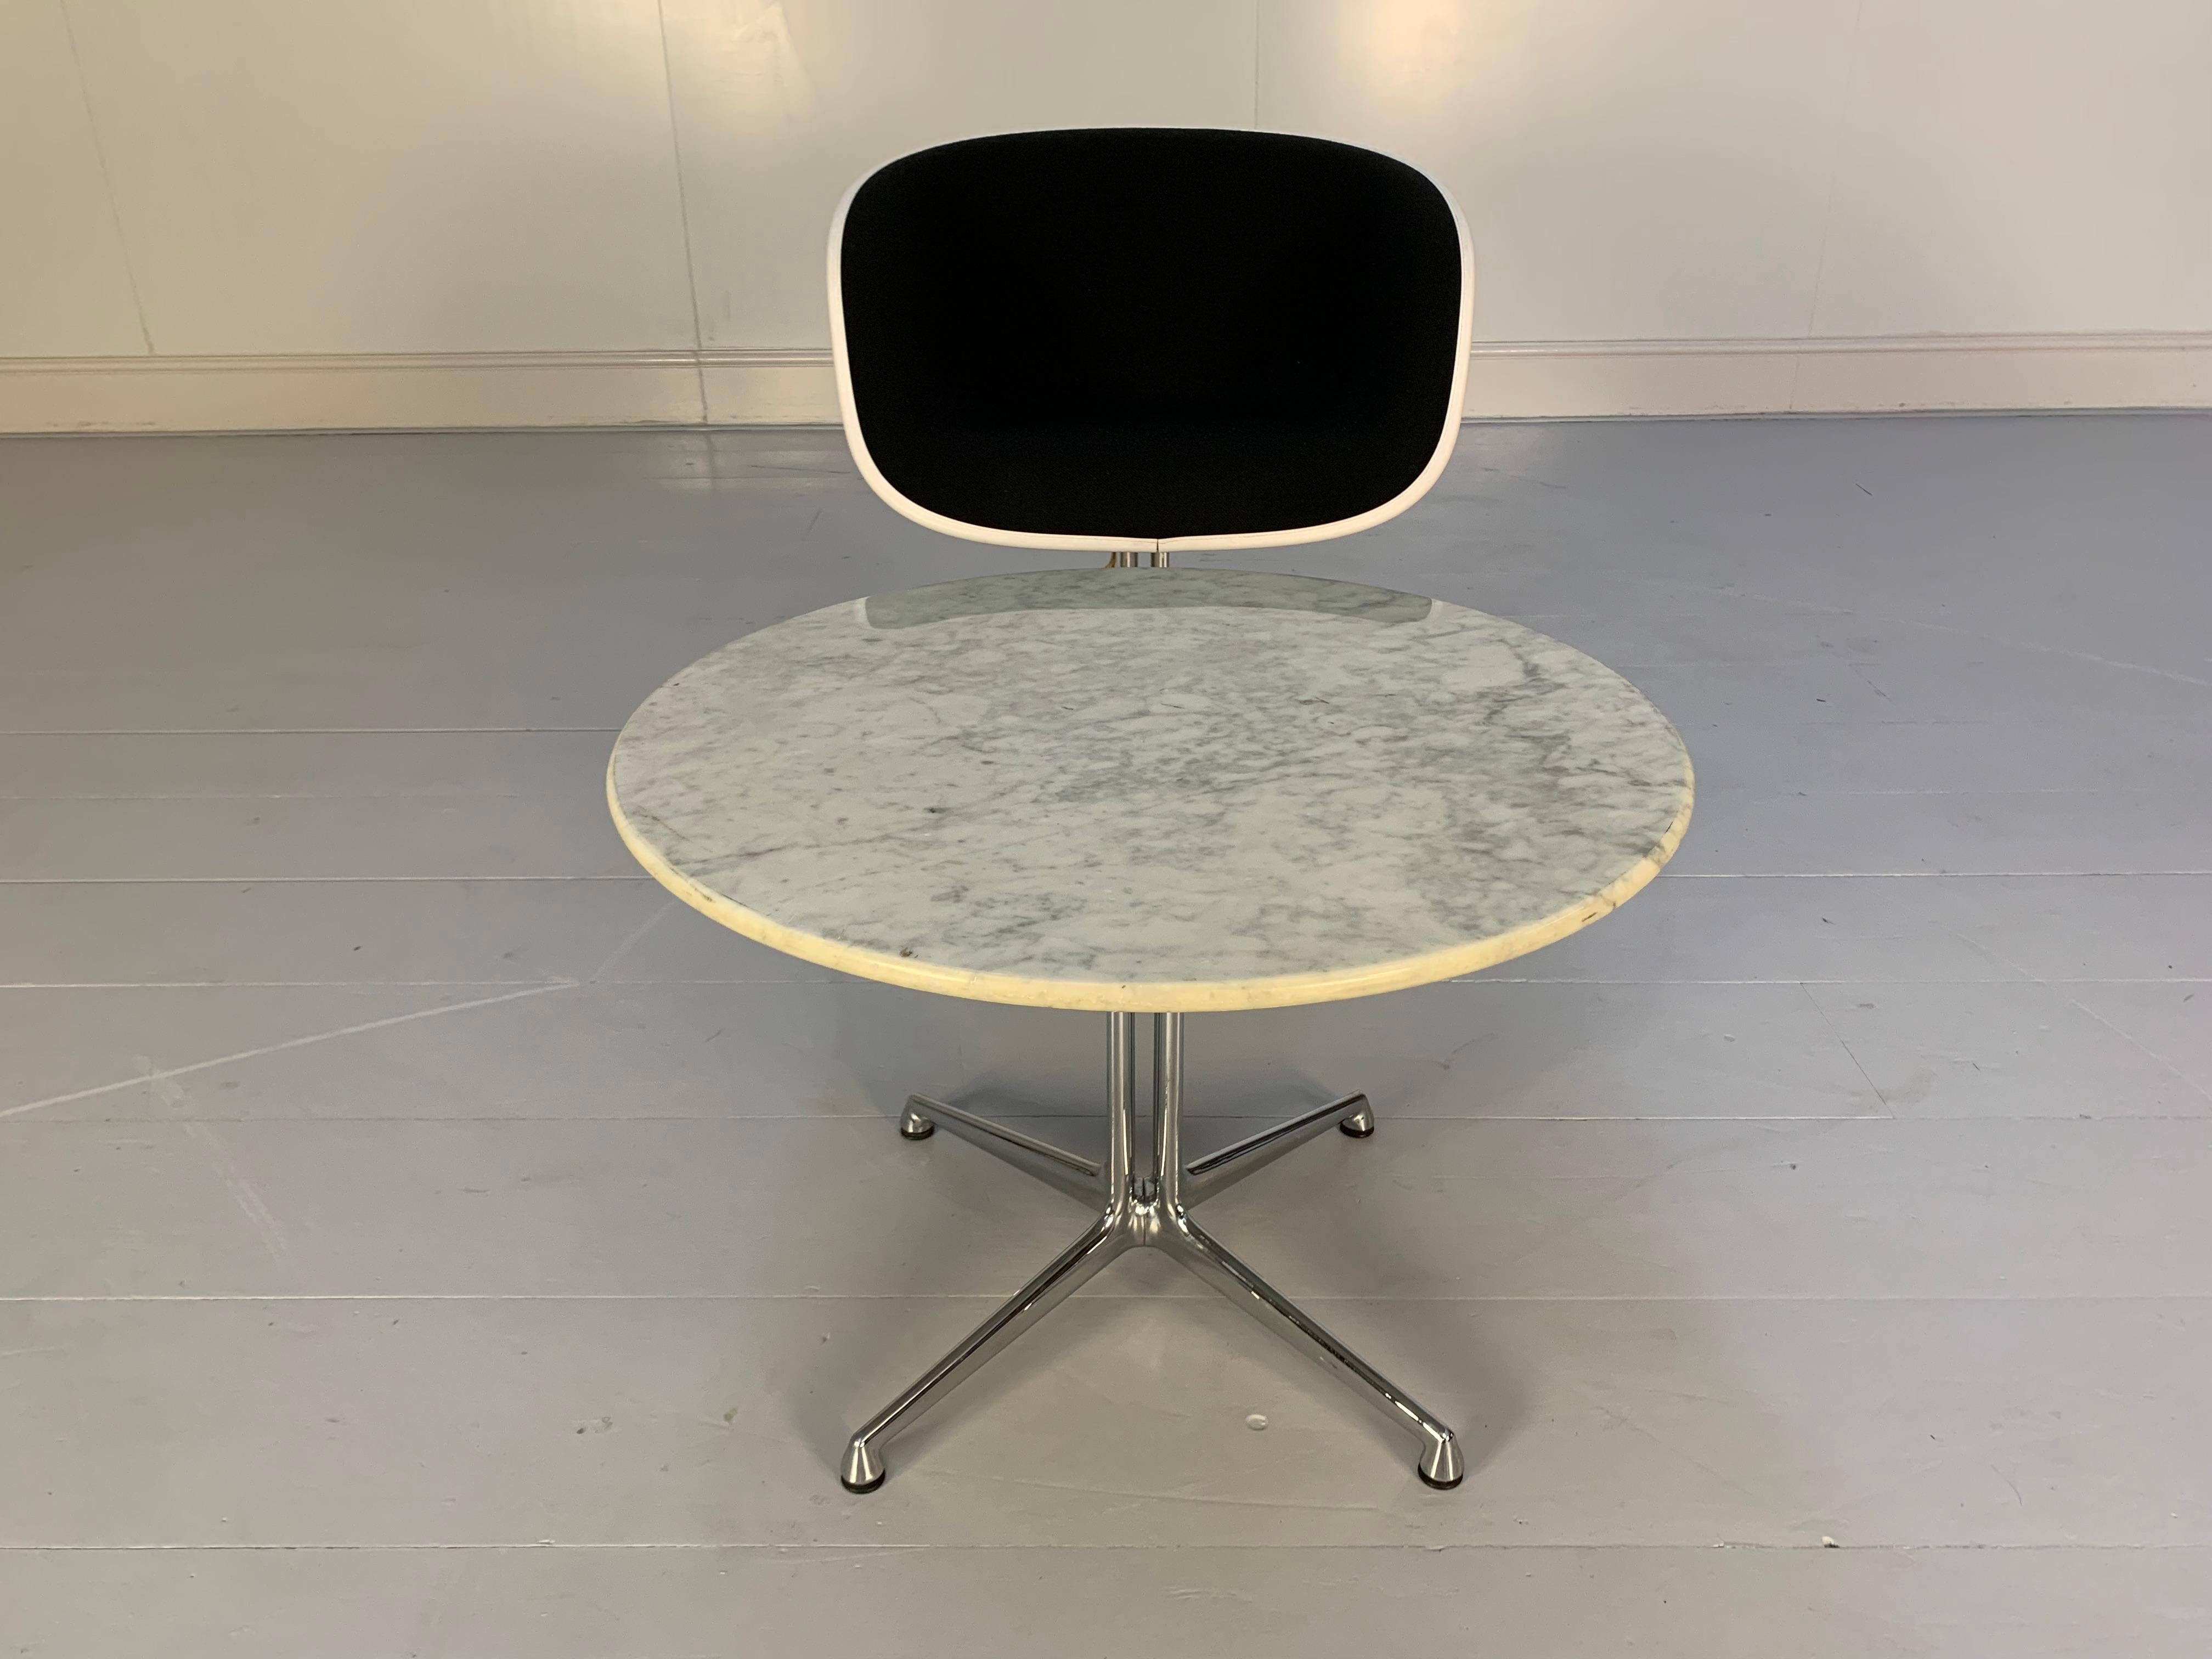 Contemporary Vitra “La Fonda” Eames Chair & Marble Table in Black Hopsack For Sale